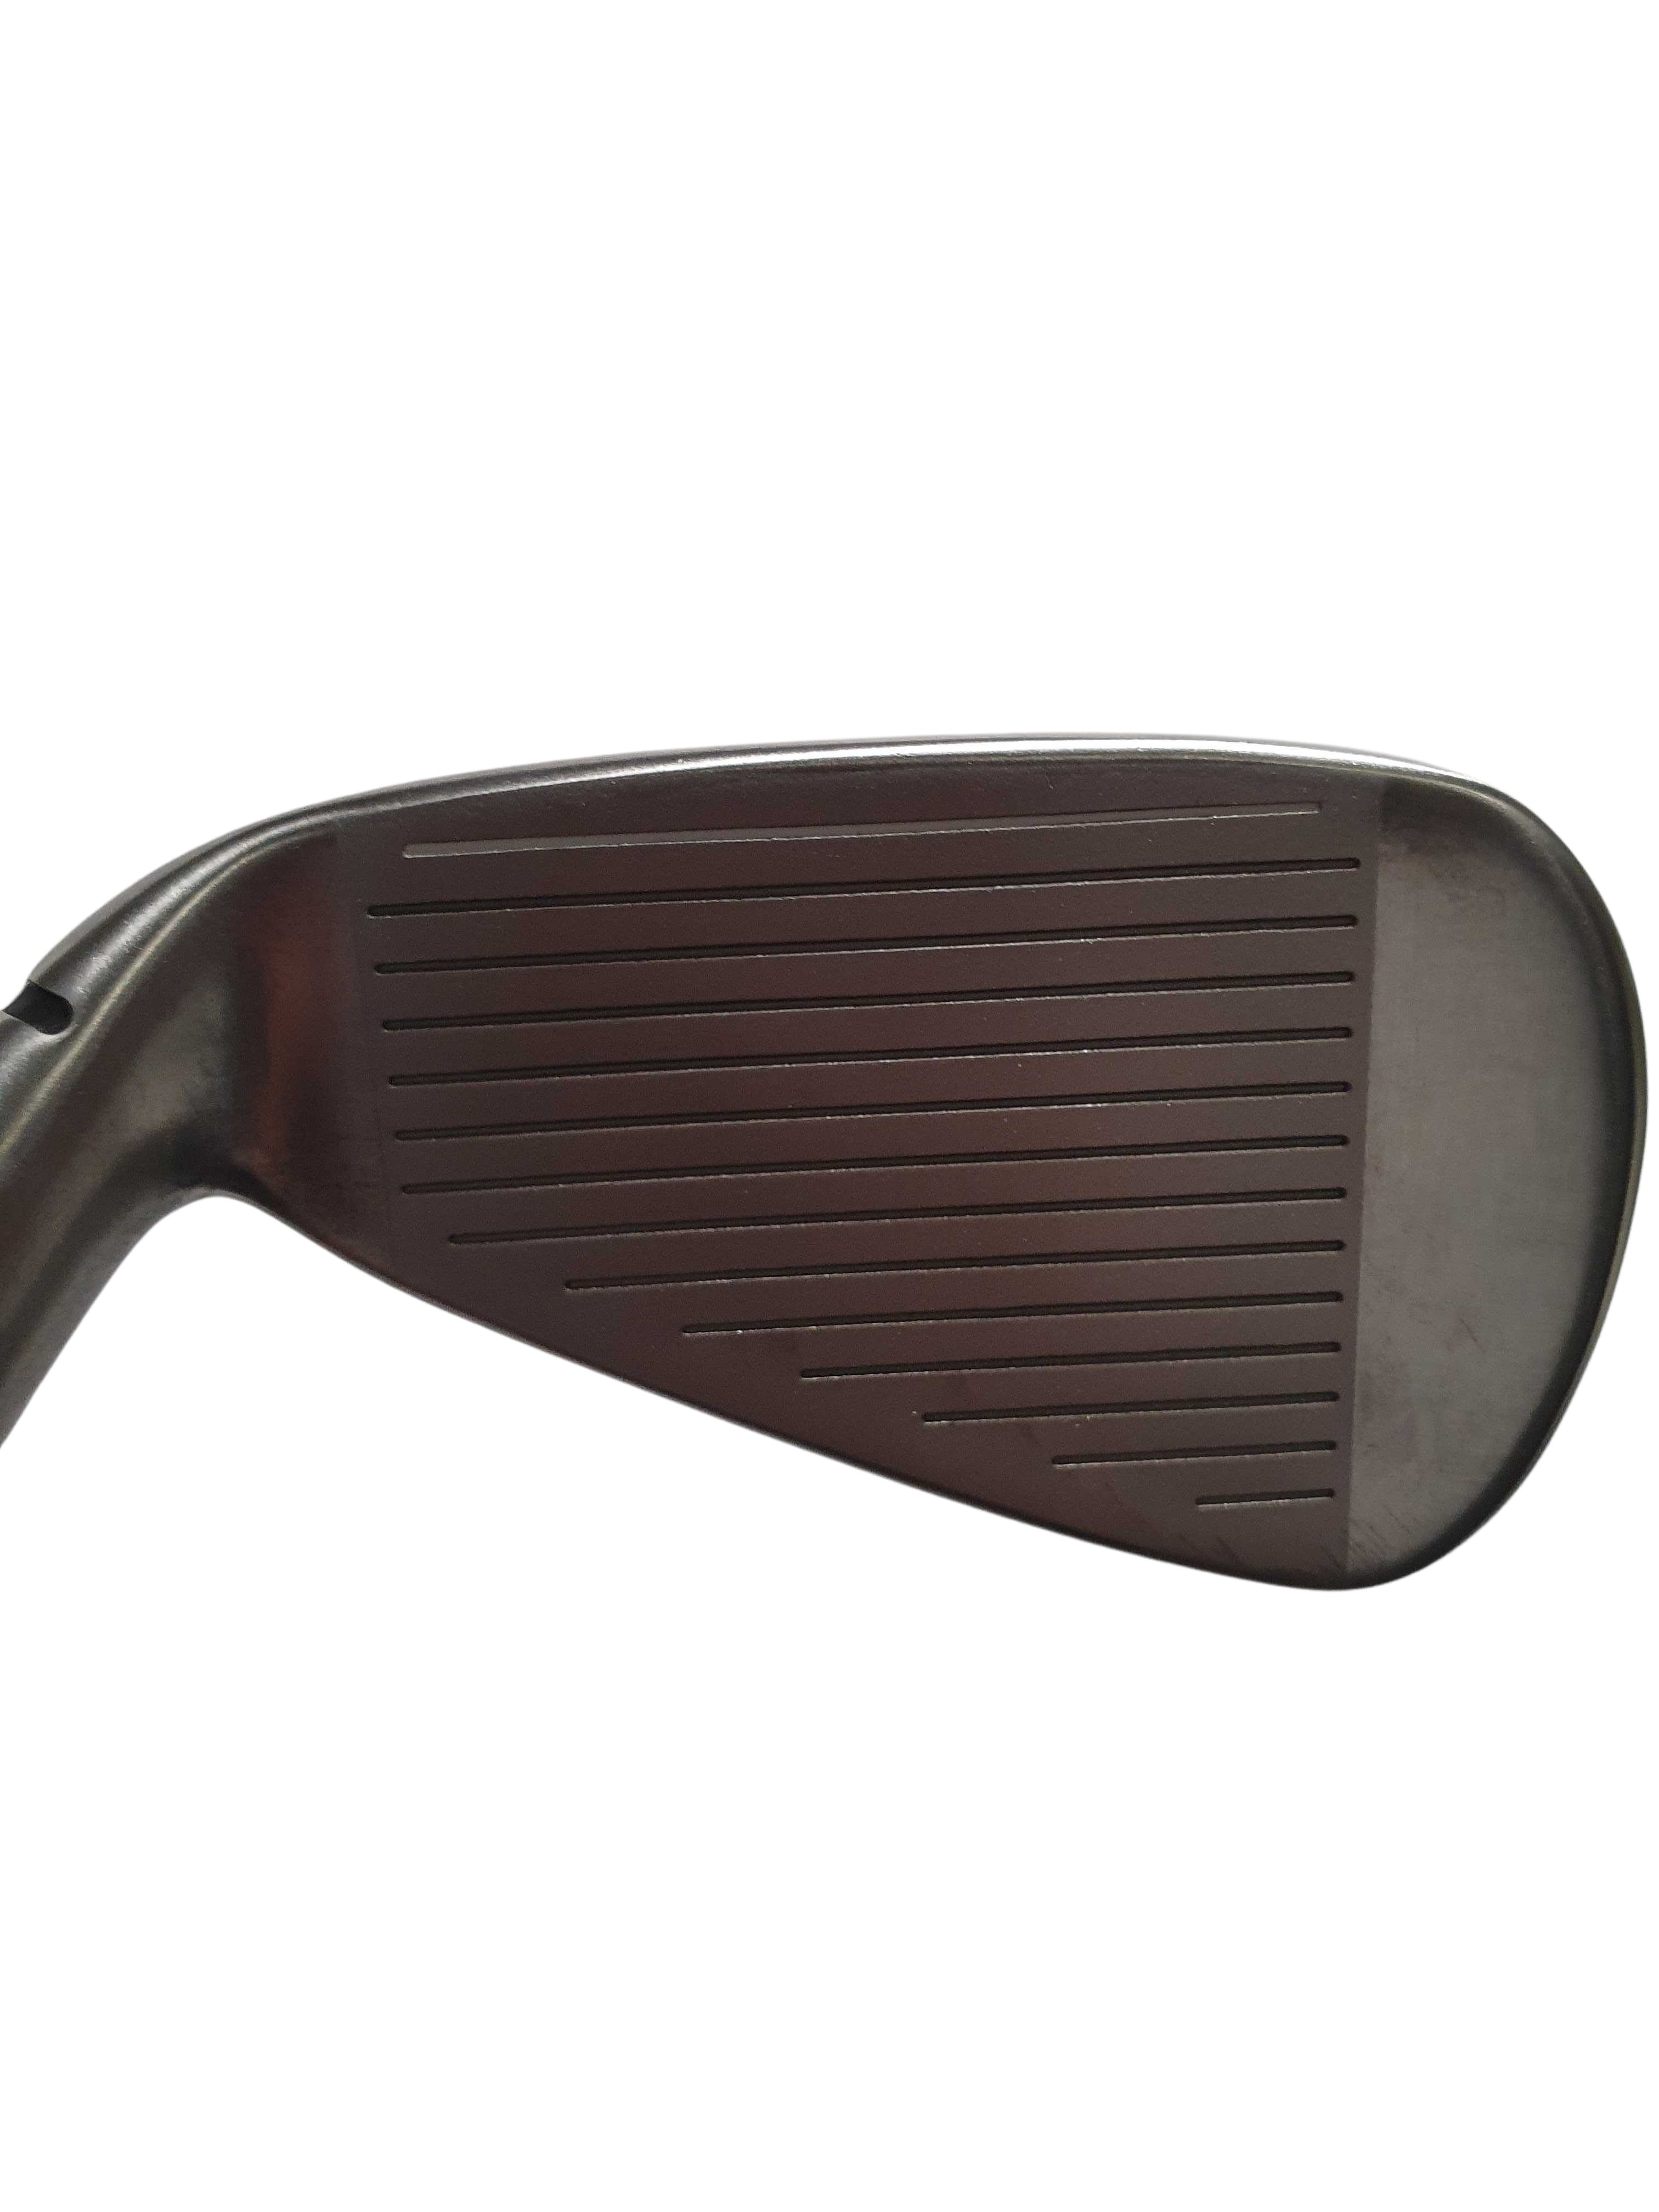 Pre-owned Taylormade Stealth Graphite Men's Regular Irons